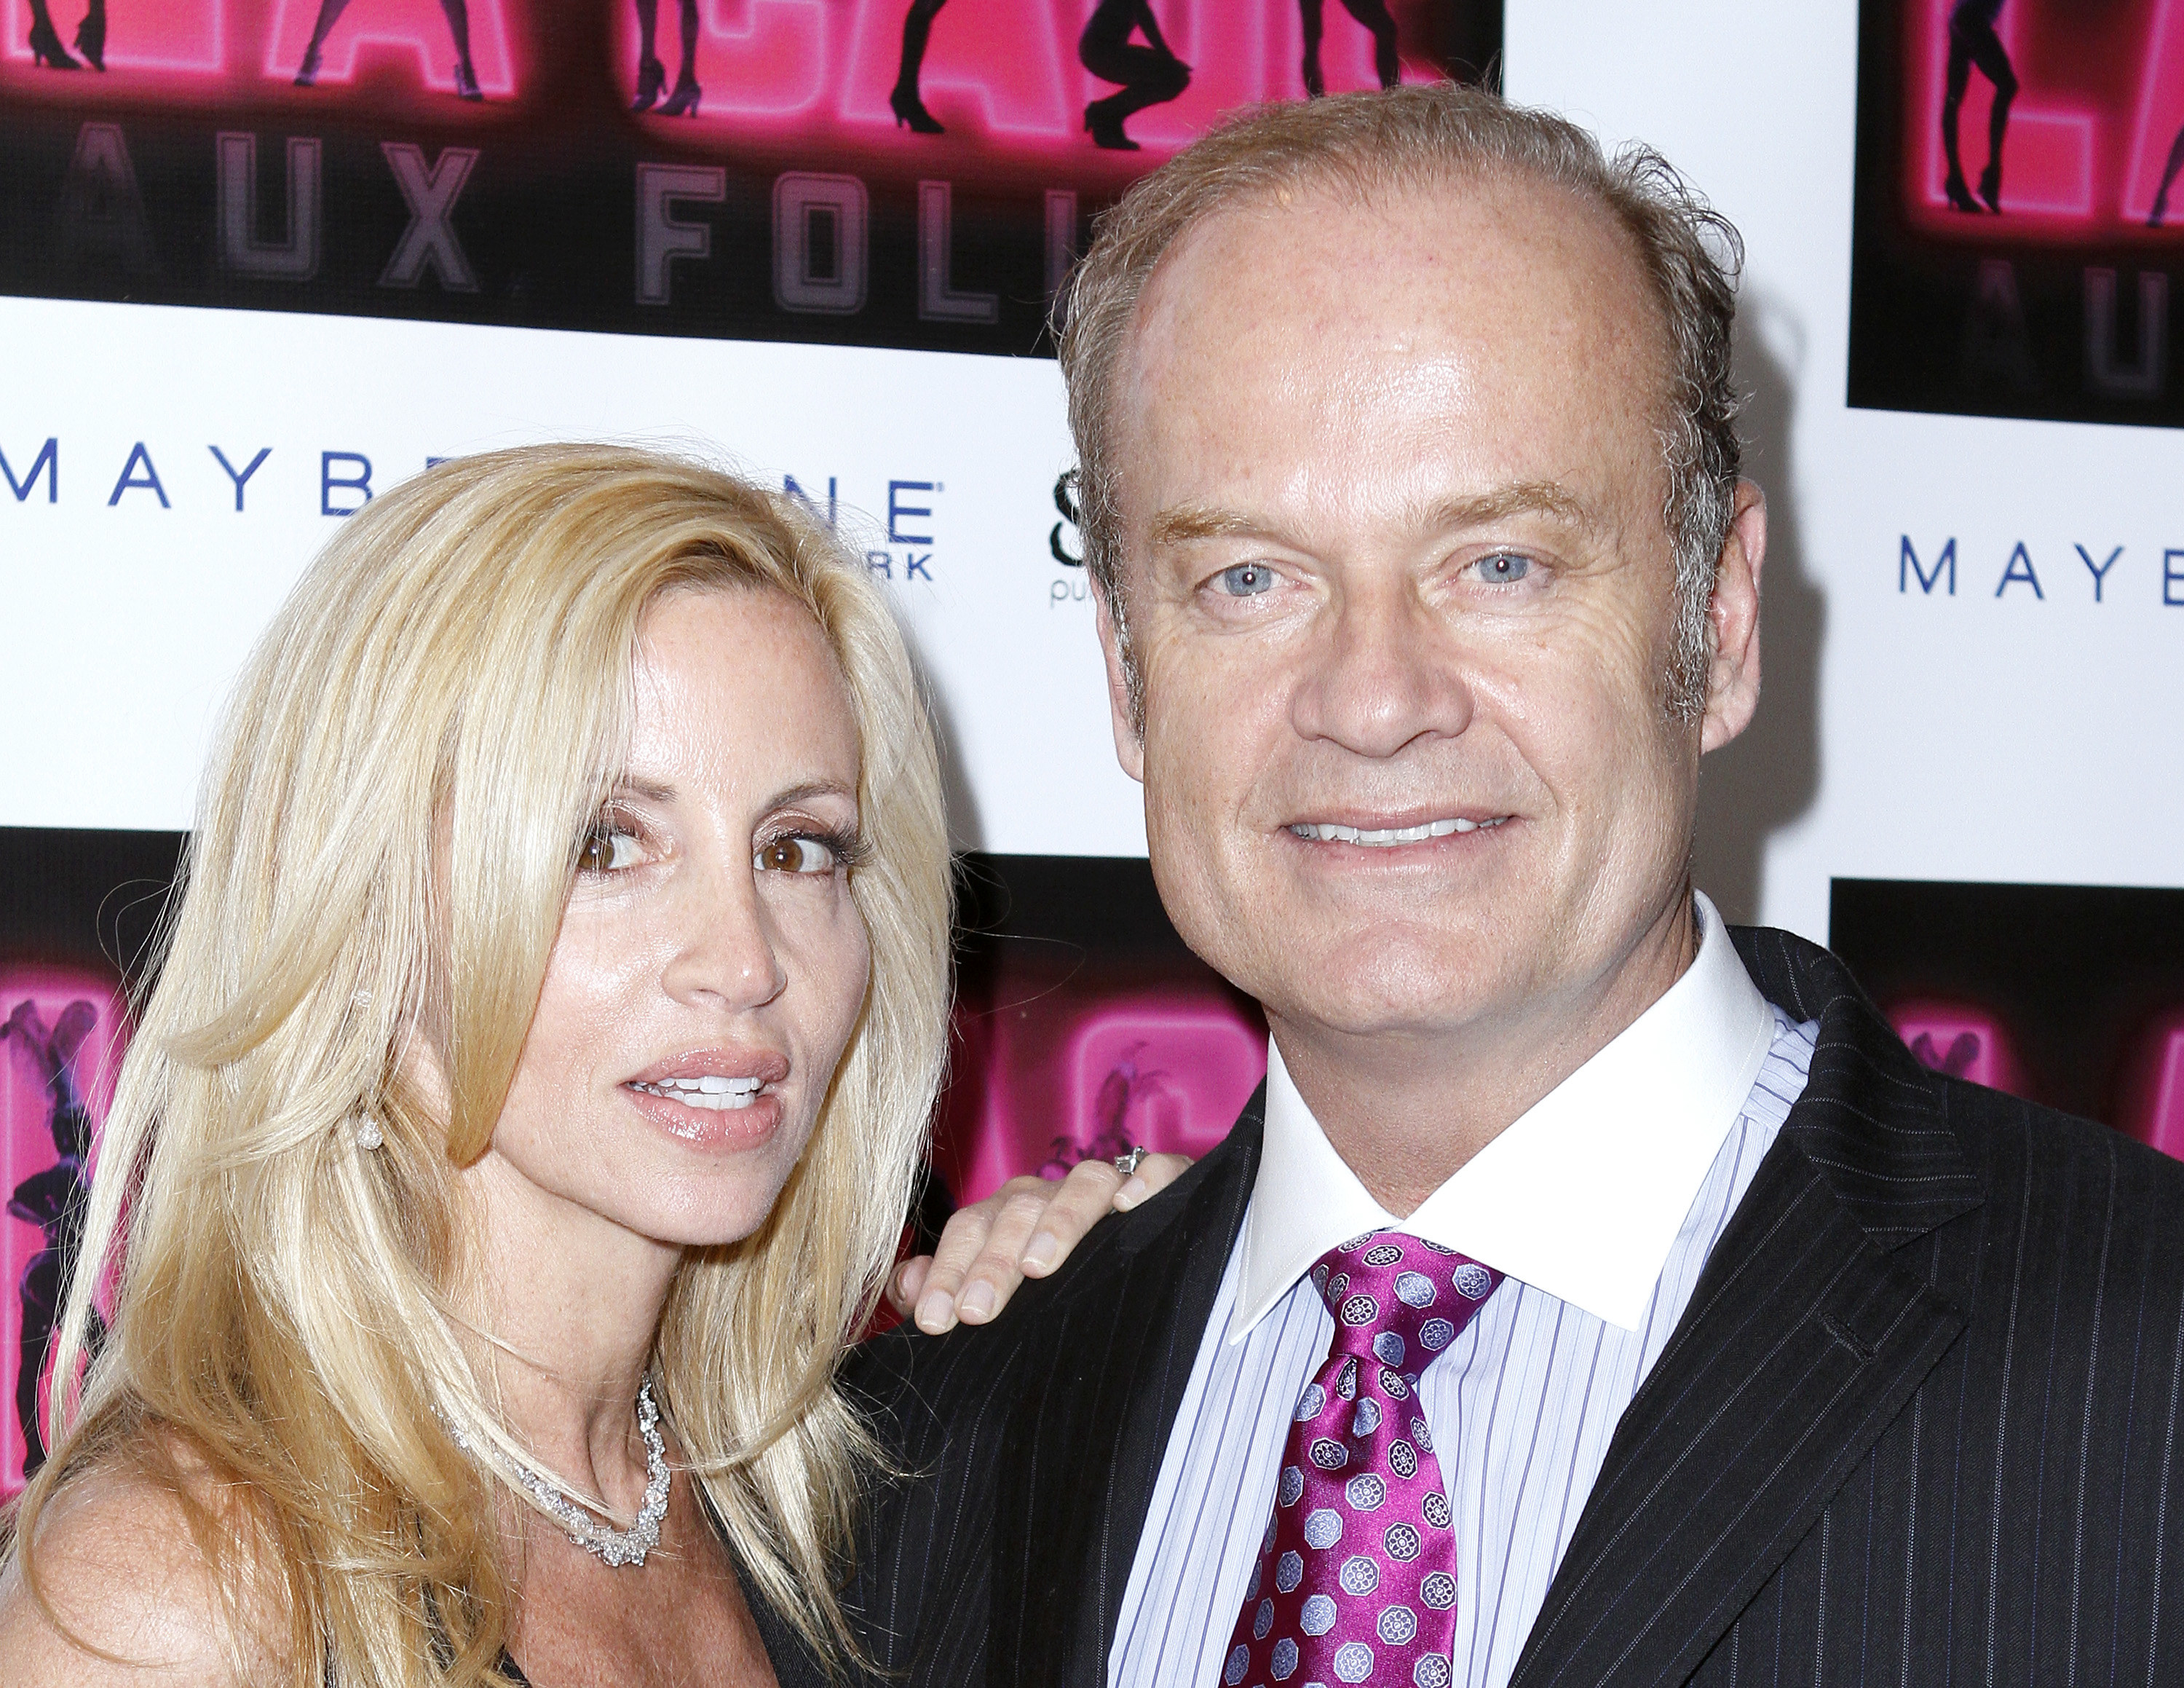 Camille Meyer and Kelsey Grammer on the red carpet in 2010